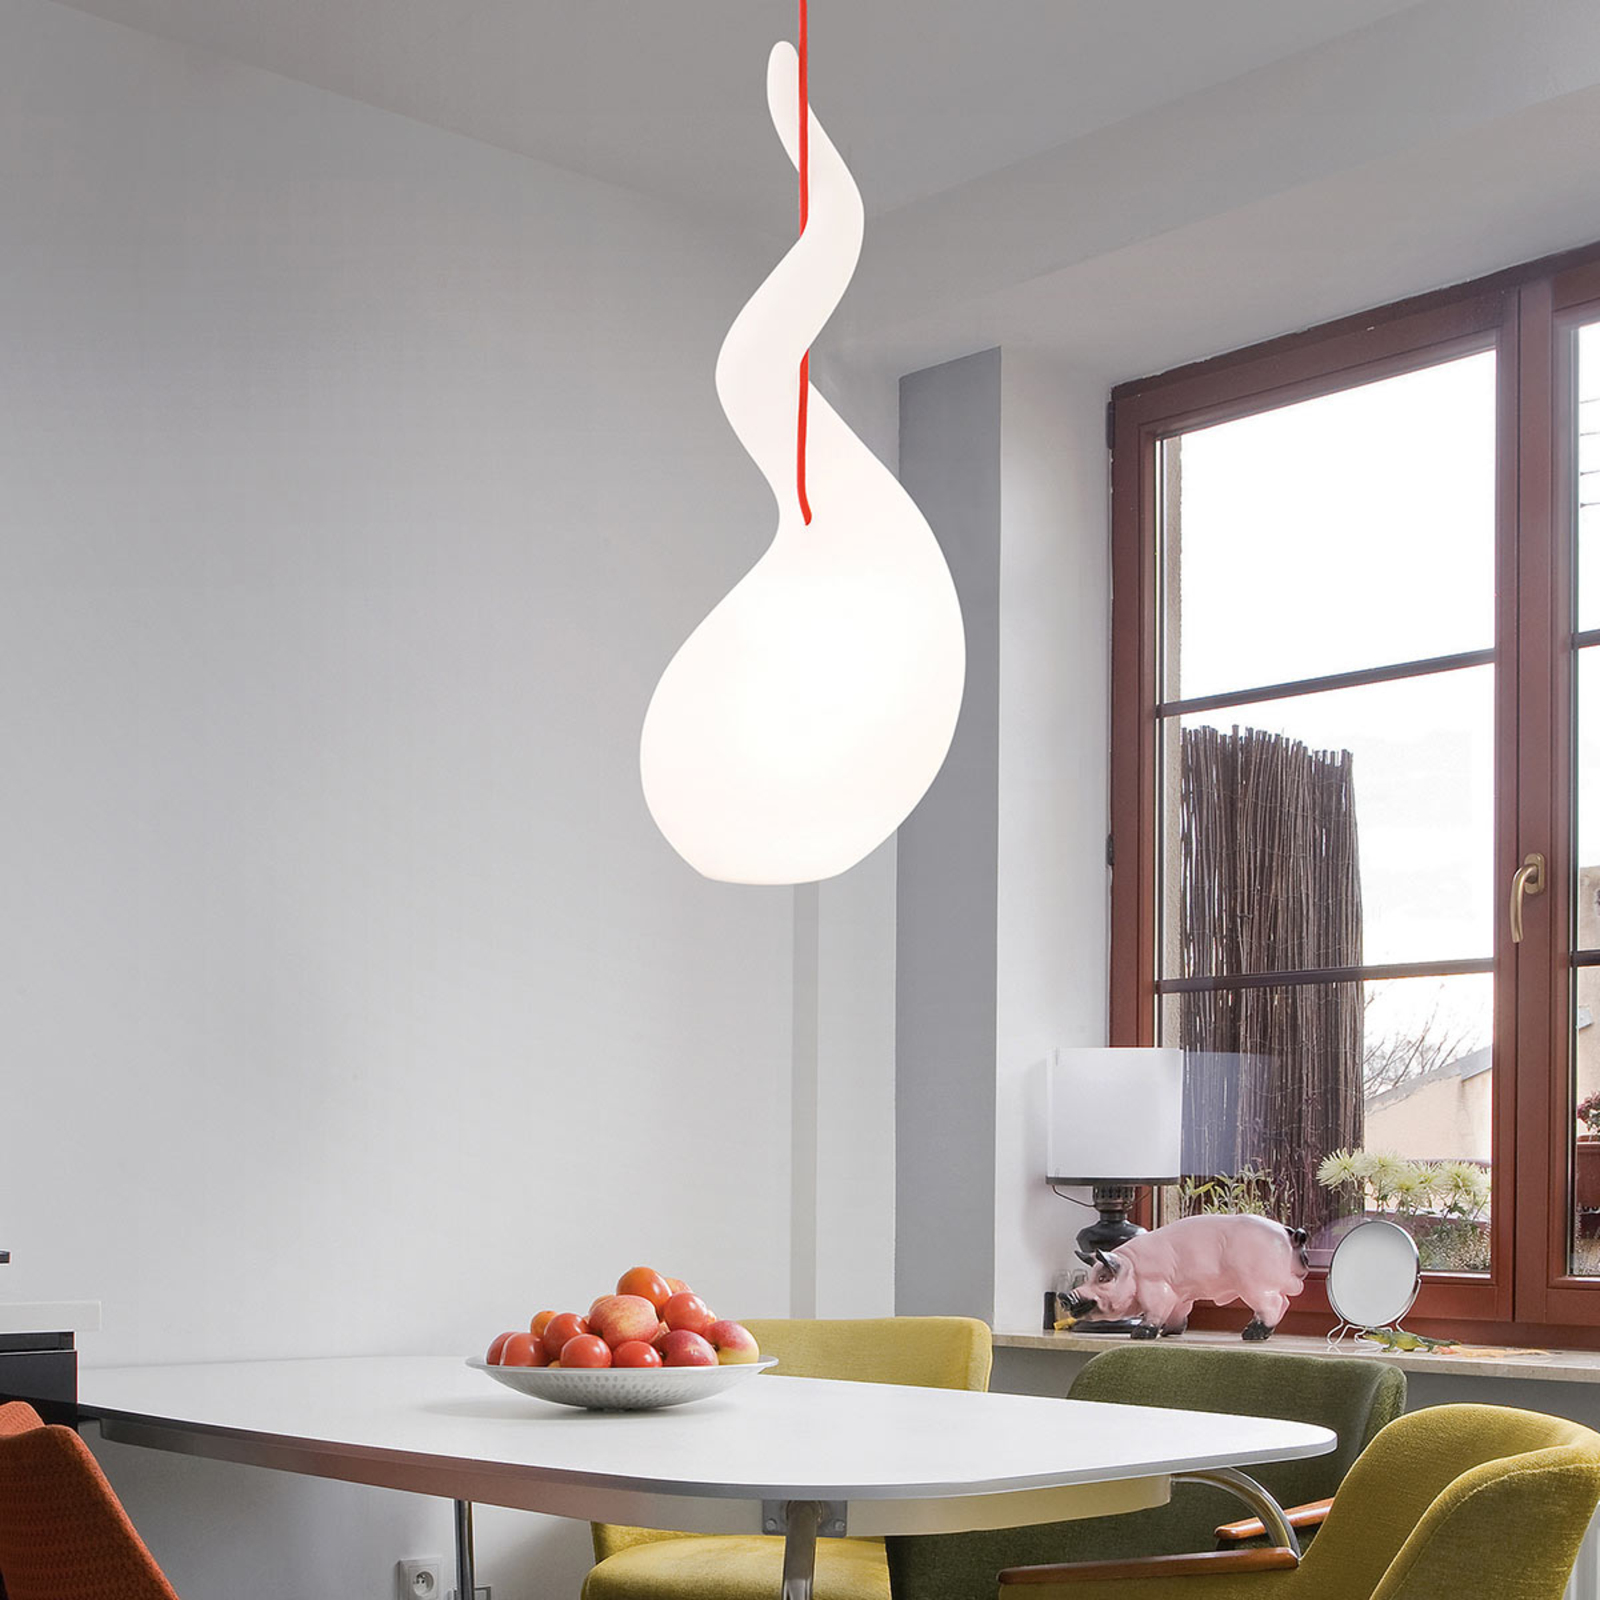 next Alien M - Pendant light with red cable